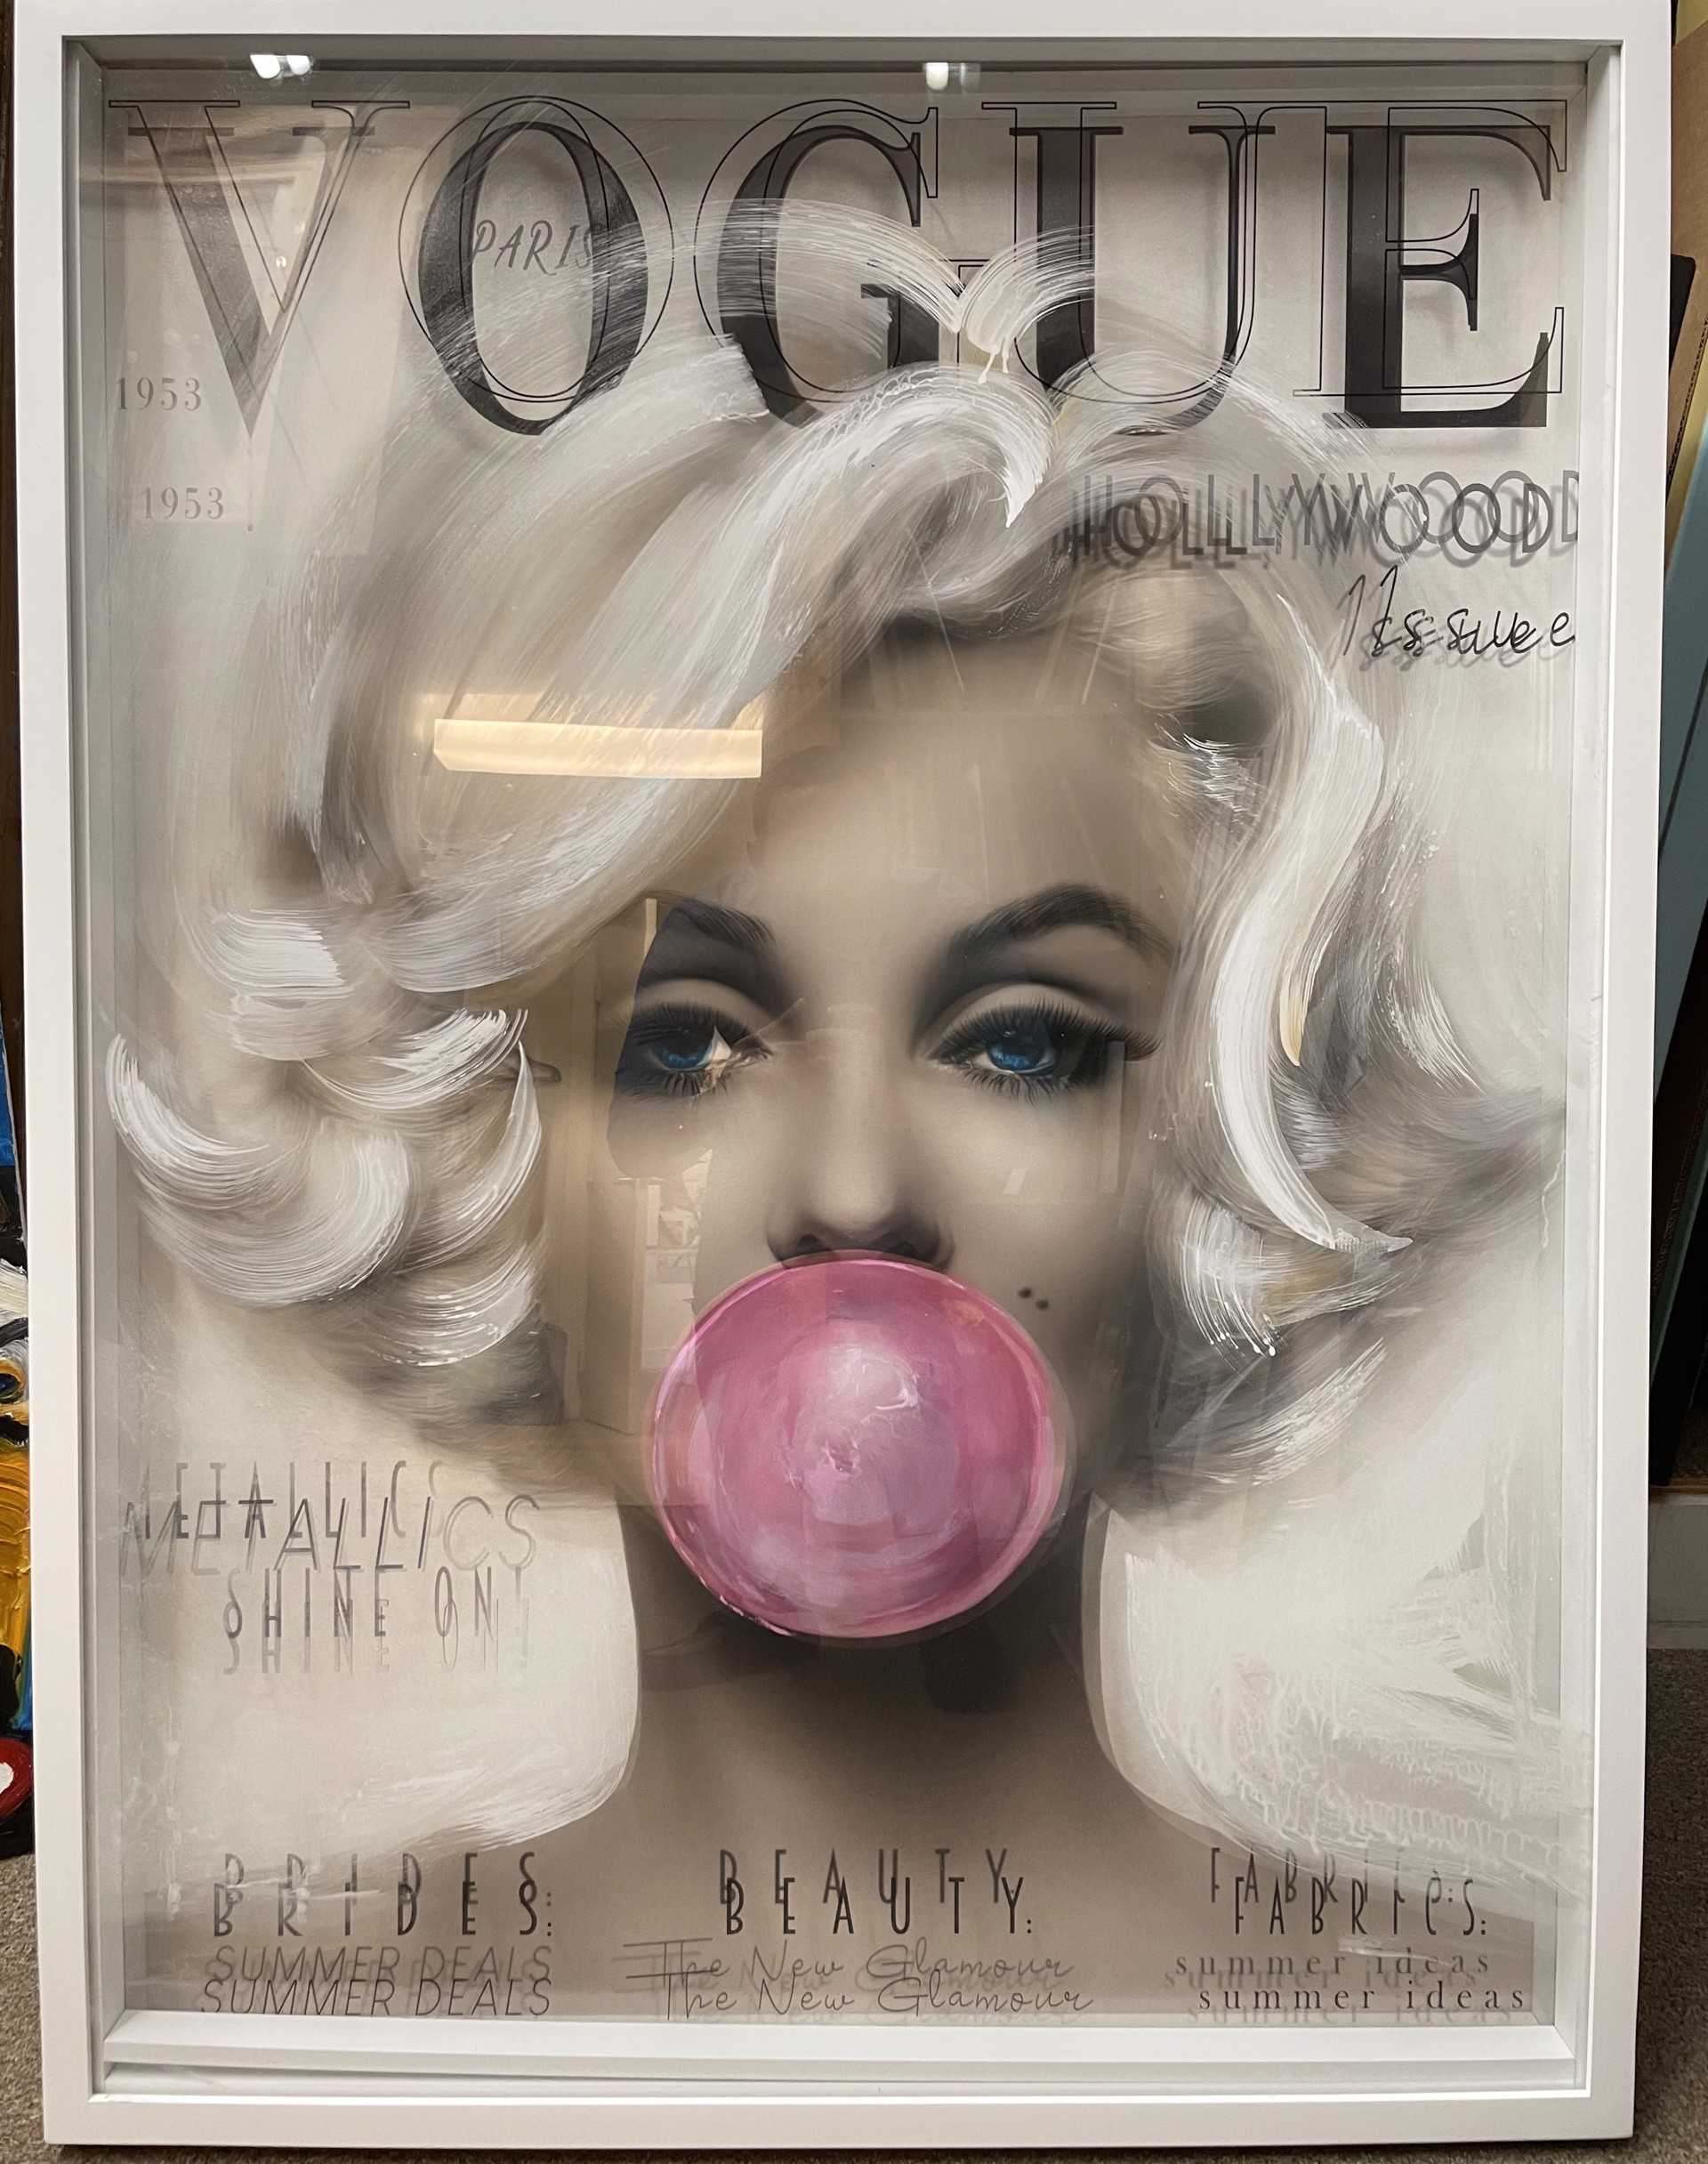 Vogue (Marilyn-Pink Bubble) by Dean Johnson